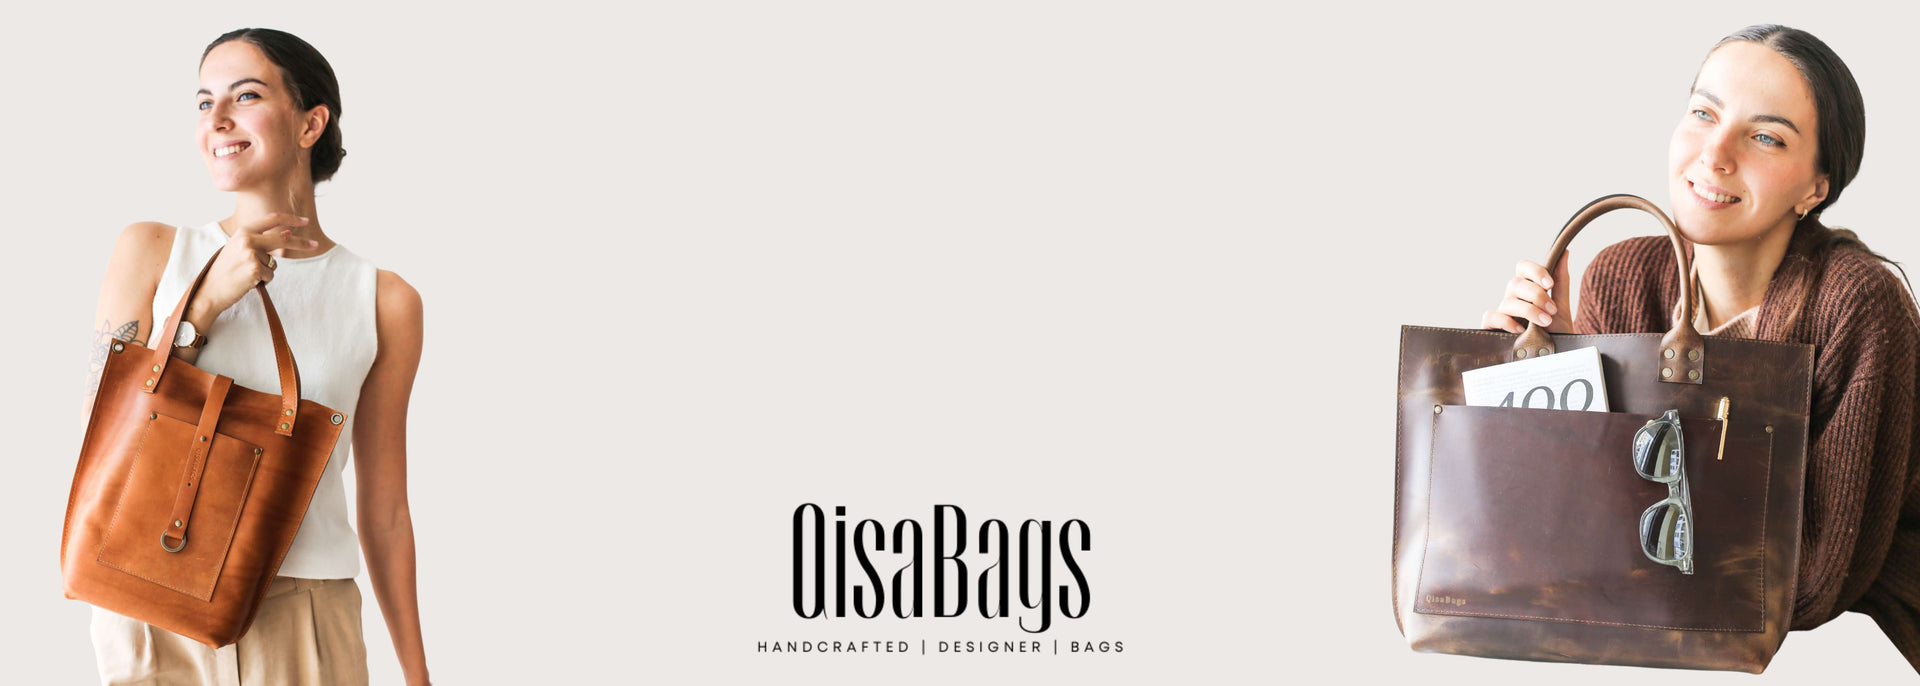 Genuine Leather Bags and Handbags by Qisabags